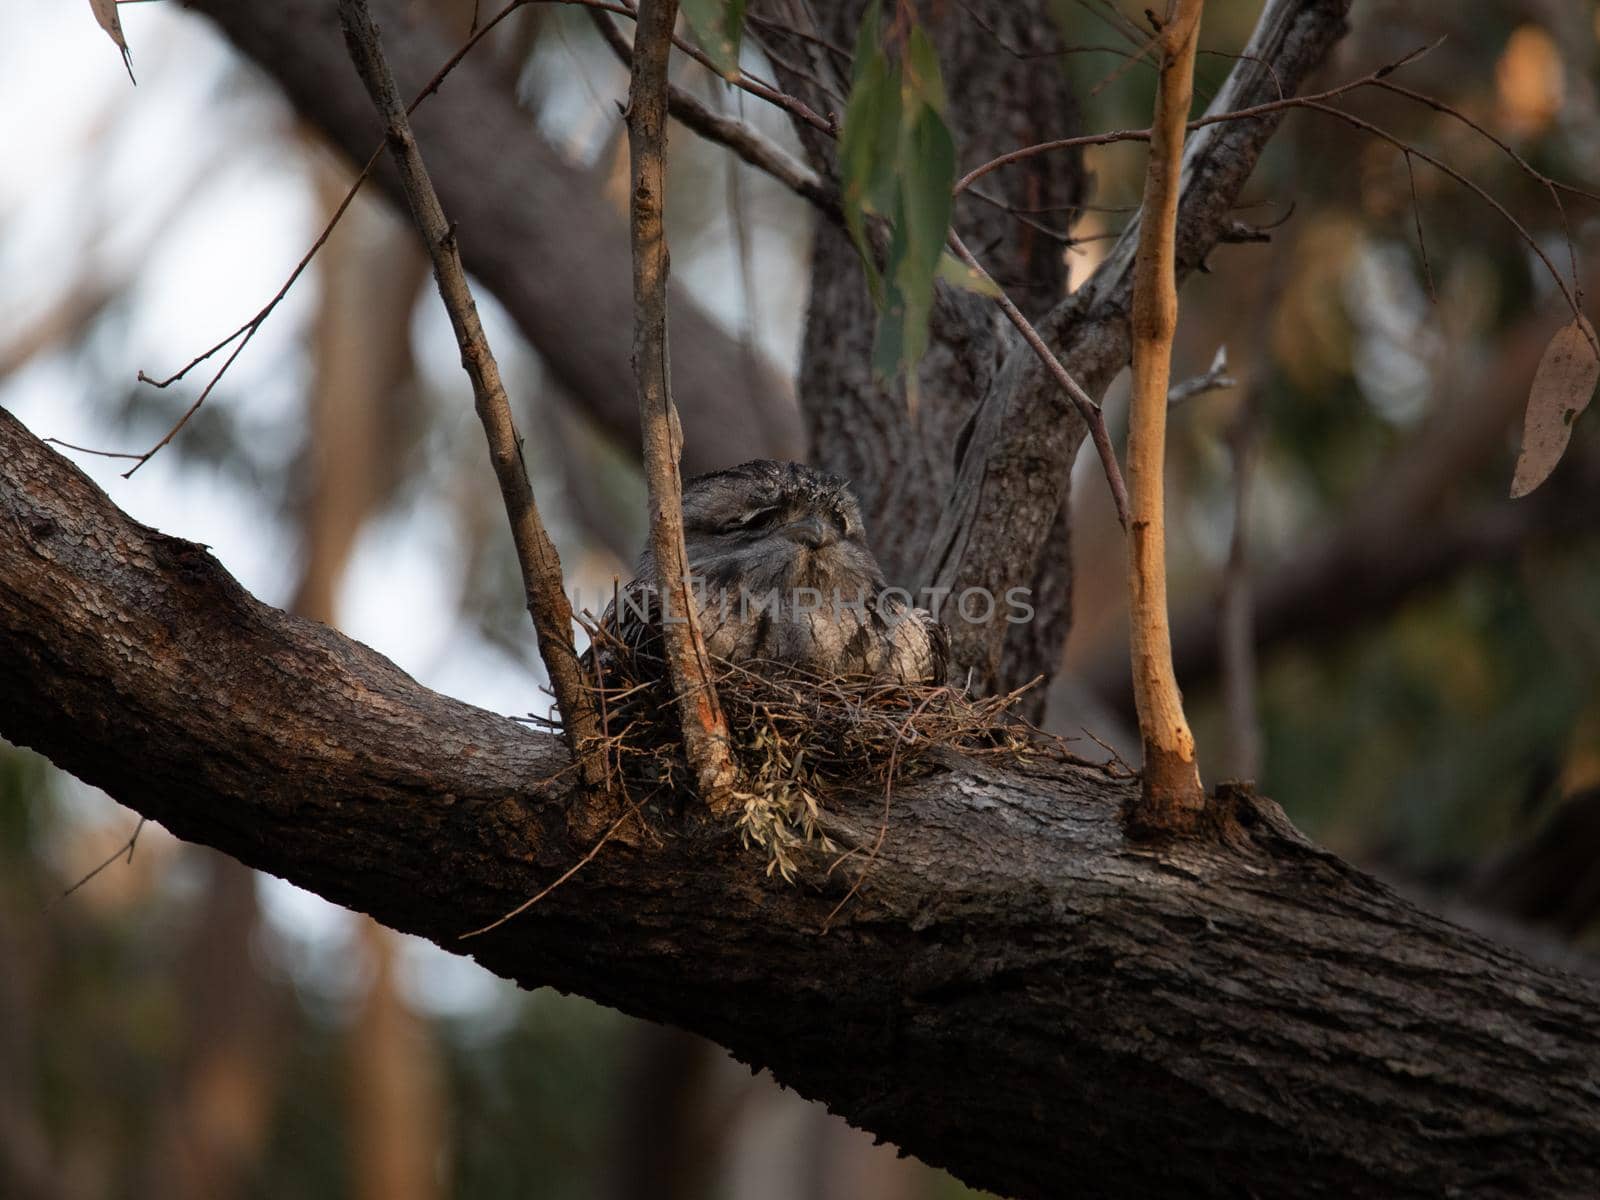 Tawny Frogmouth nesting on top of its chicks. High quality photo